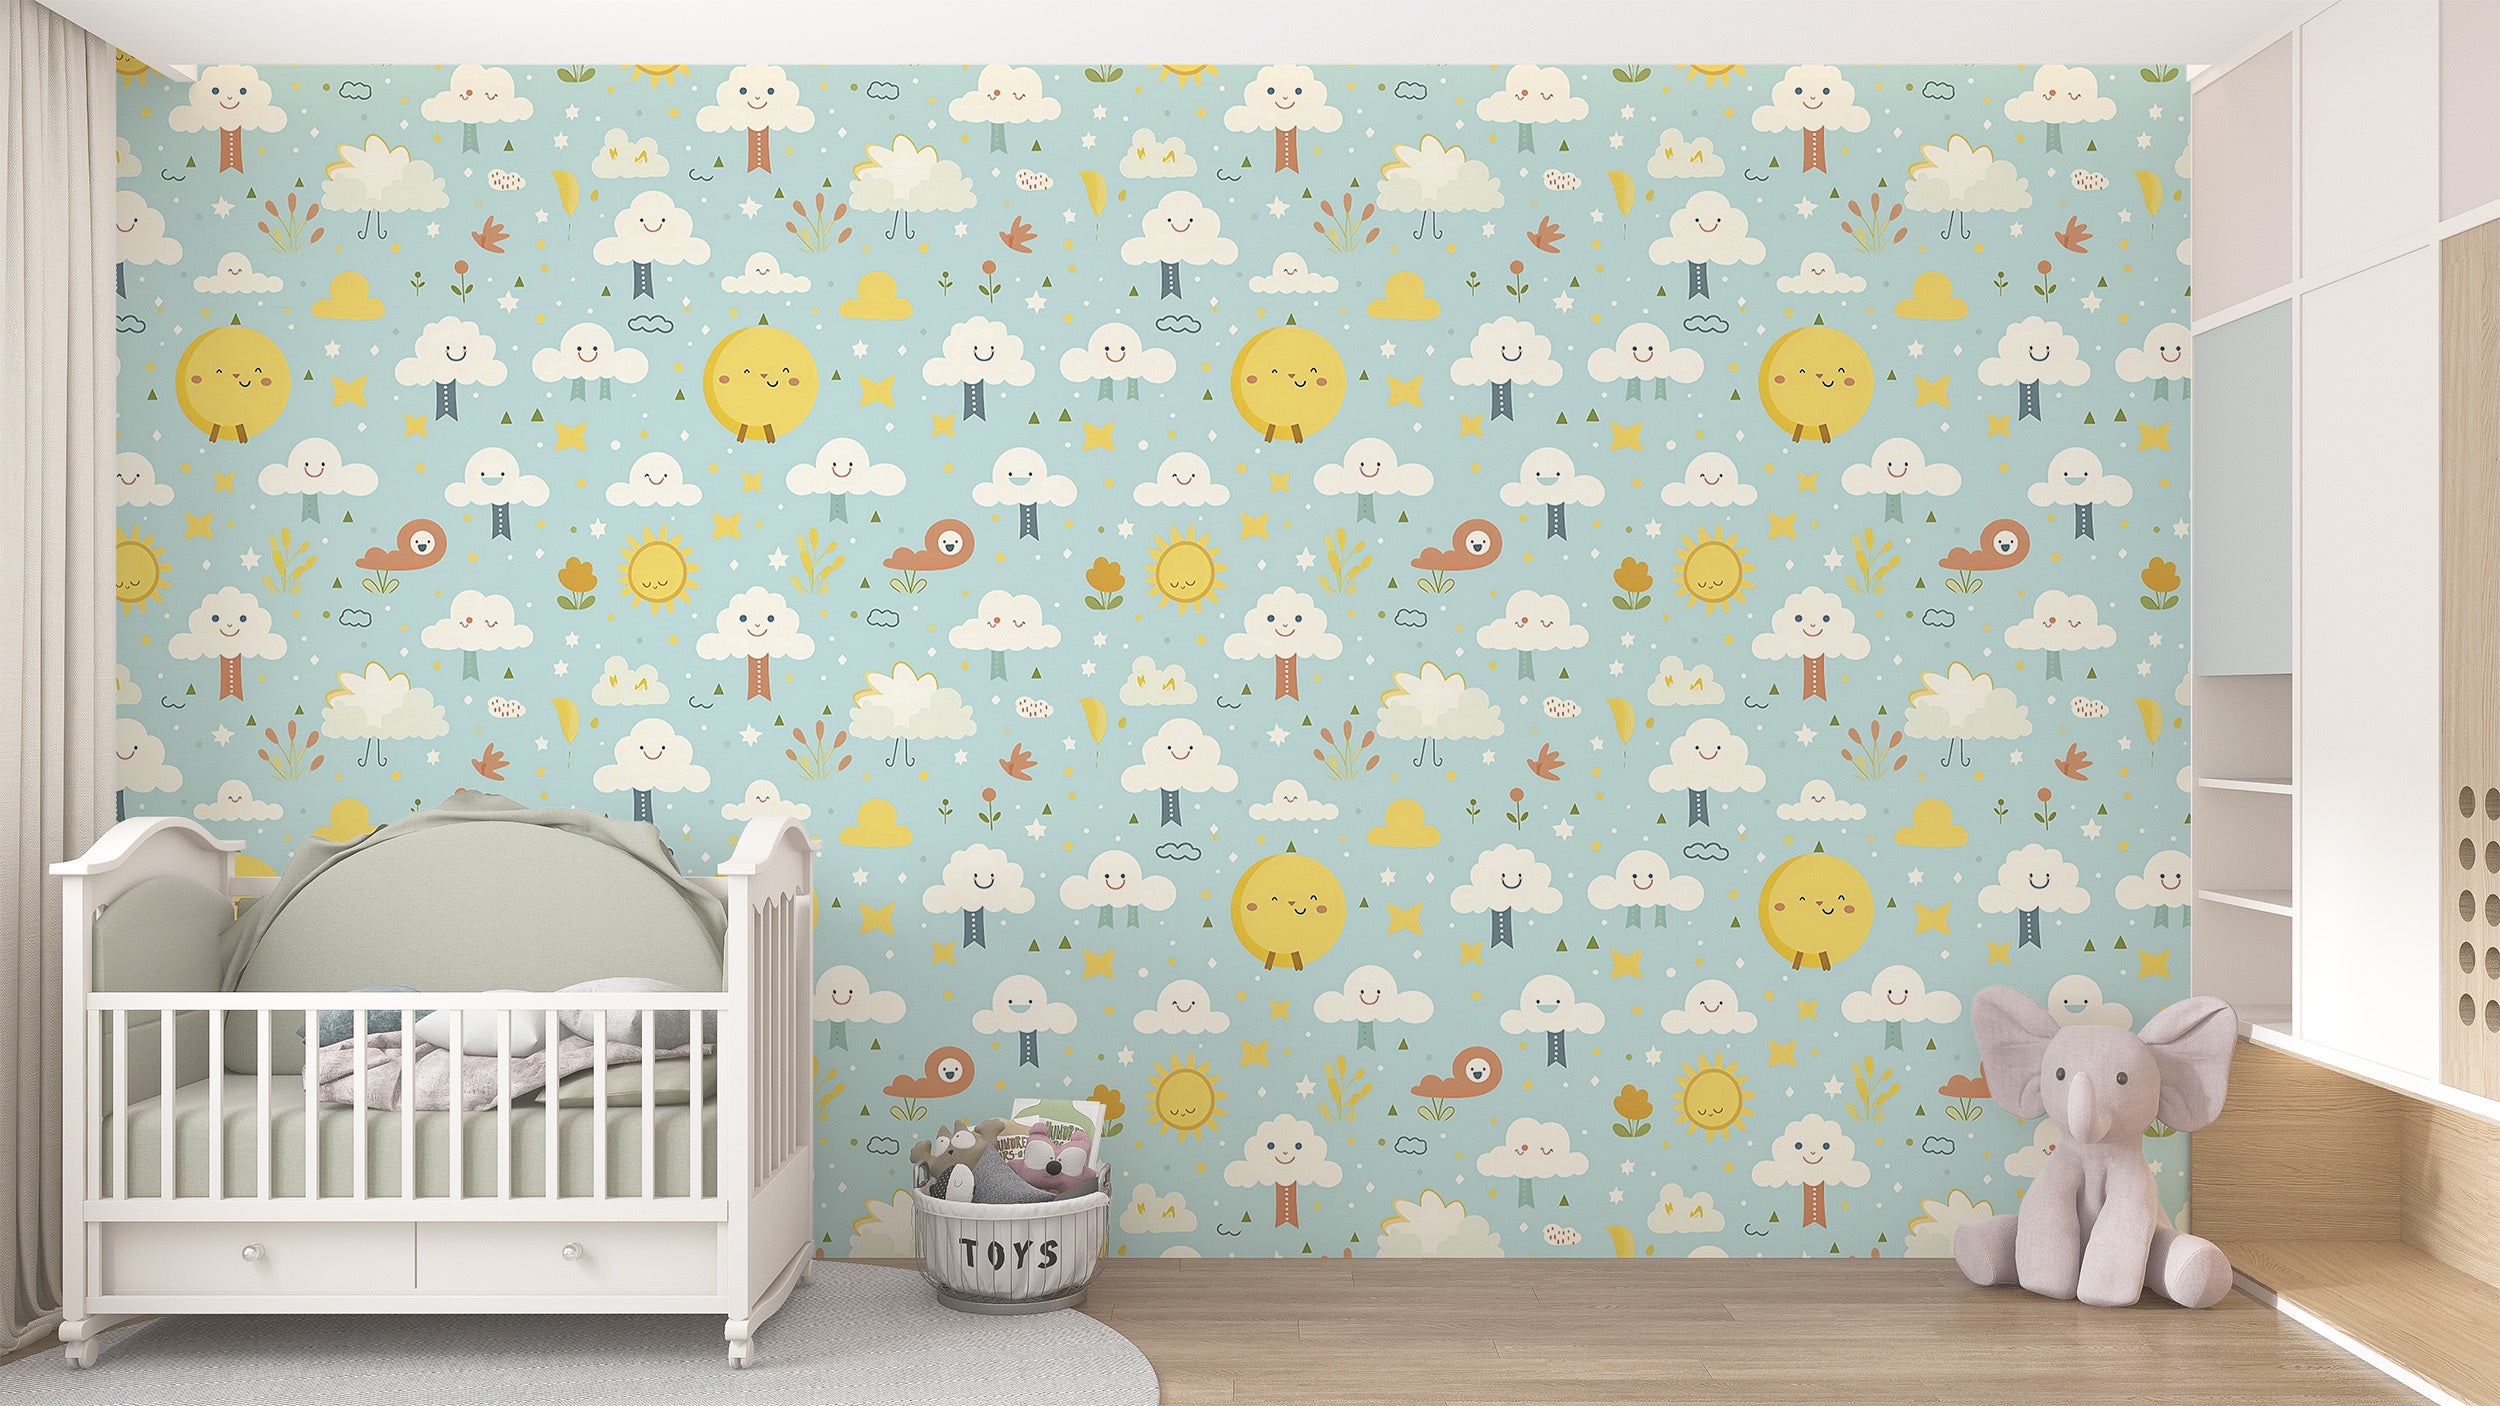 Whimsical Sun and Clouds Nursery Wallpaper Design